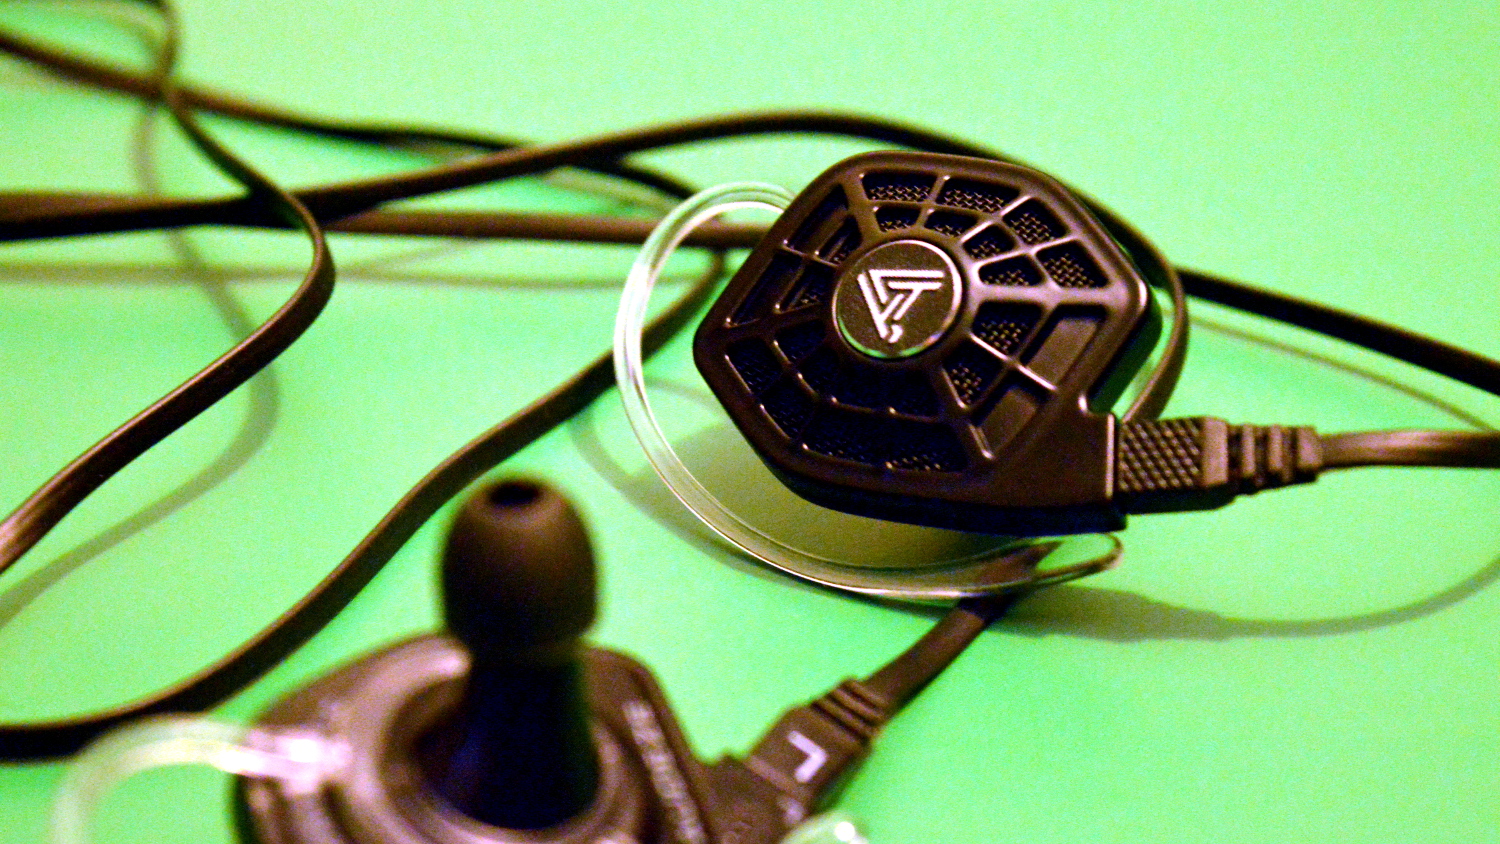 Audeze iSine 10 Planar Magnetic In-Ears Review - Headphone Review